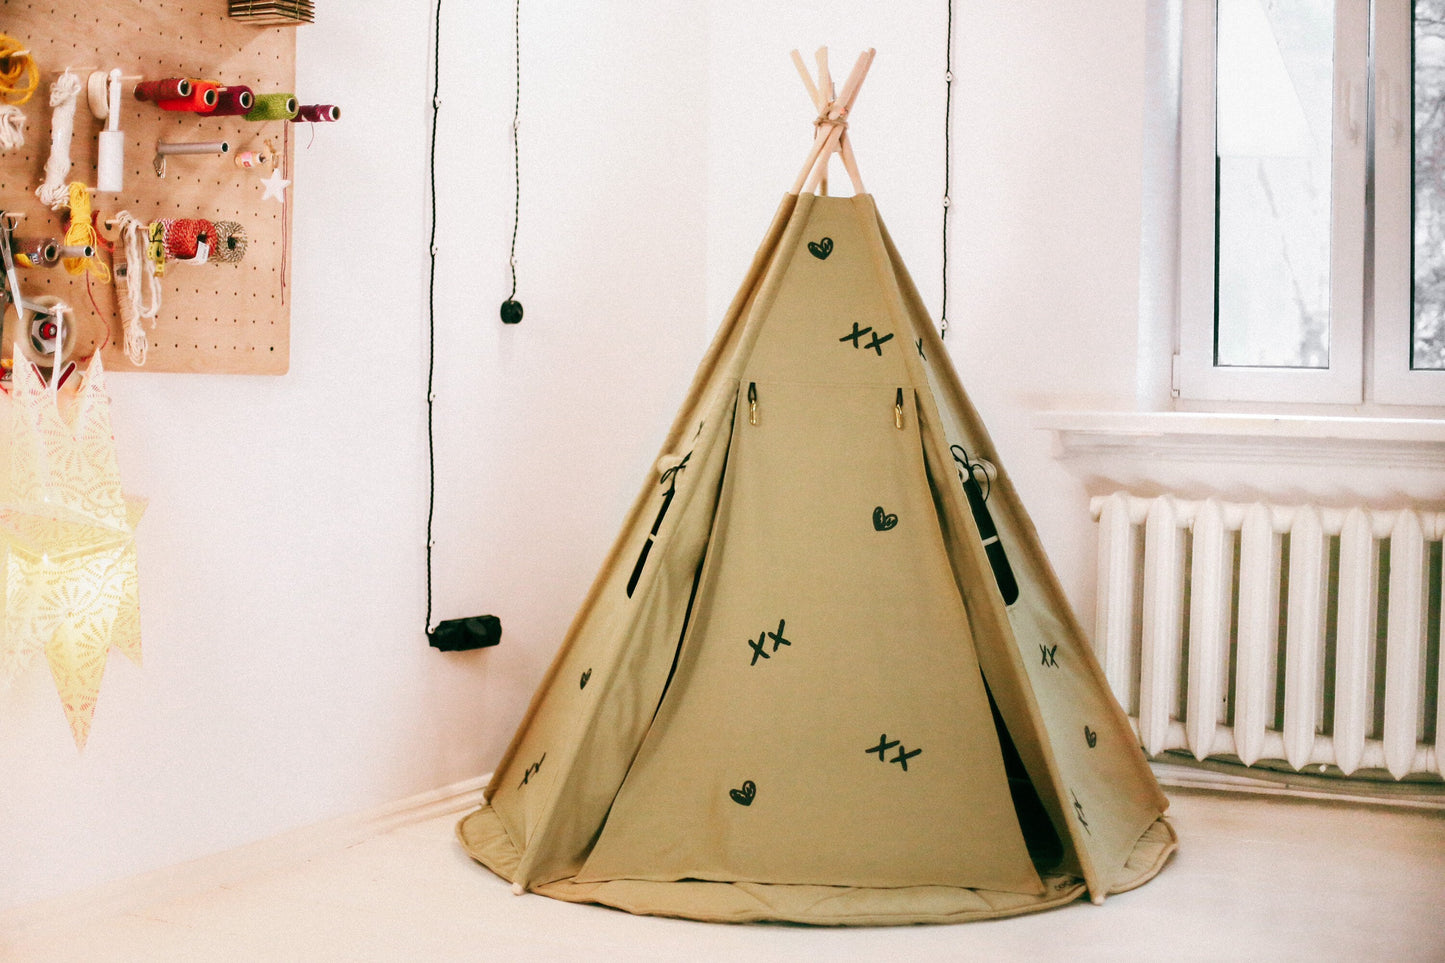 Hearts and Cross teepee tent, 5 sides teepee for kids, round play mat, leather and brass accessories, Christmas gift